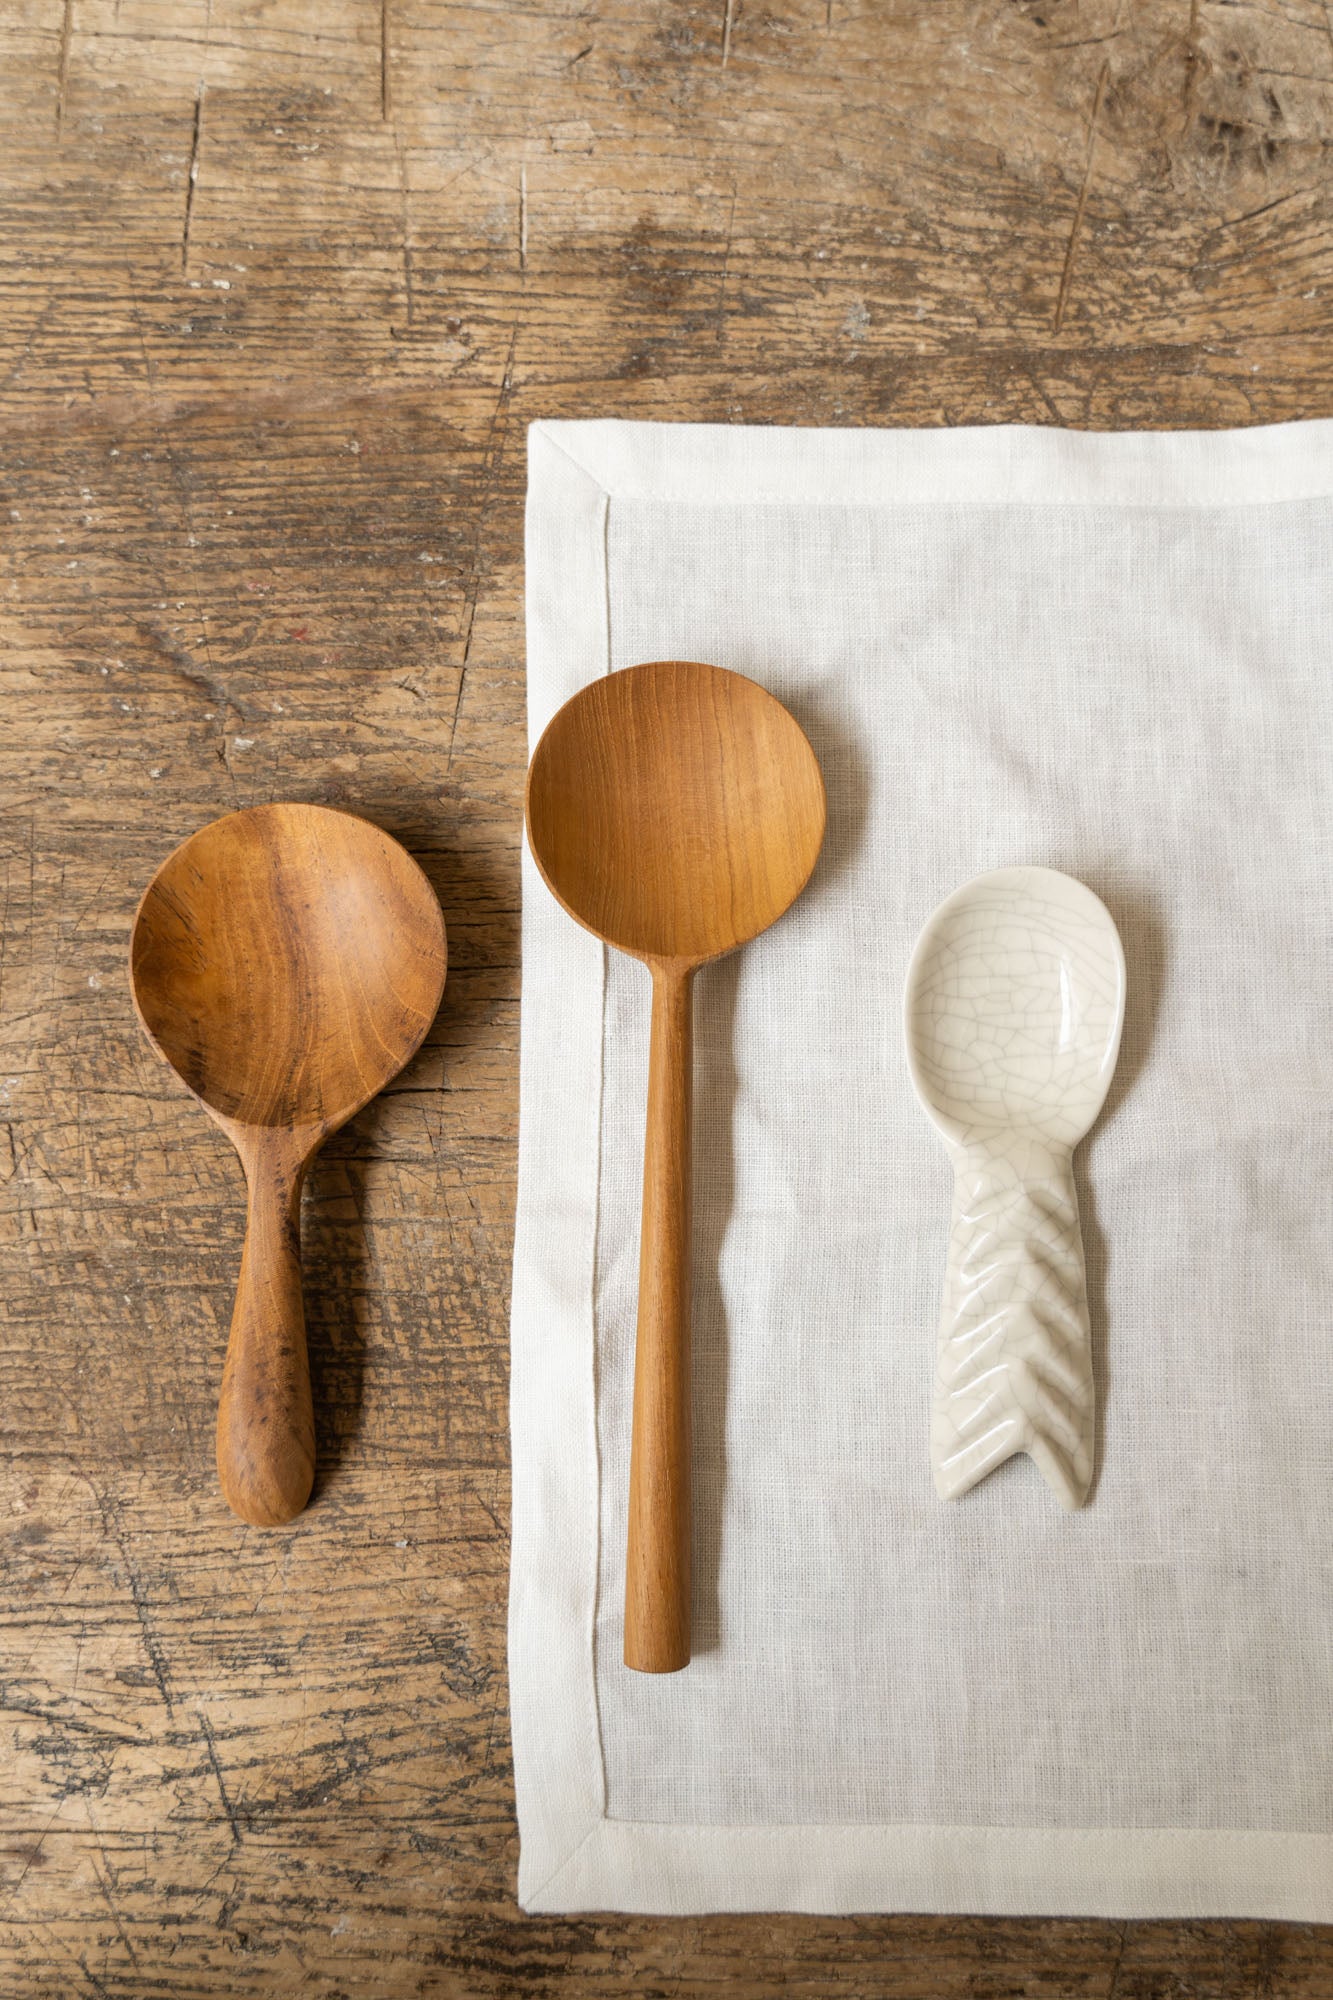 Set of spoons on wooden table